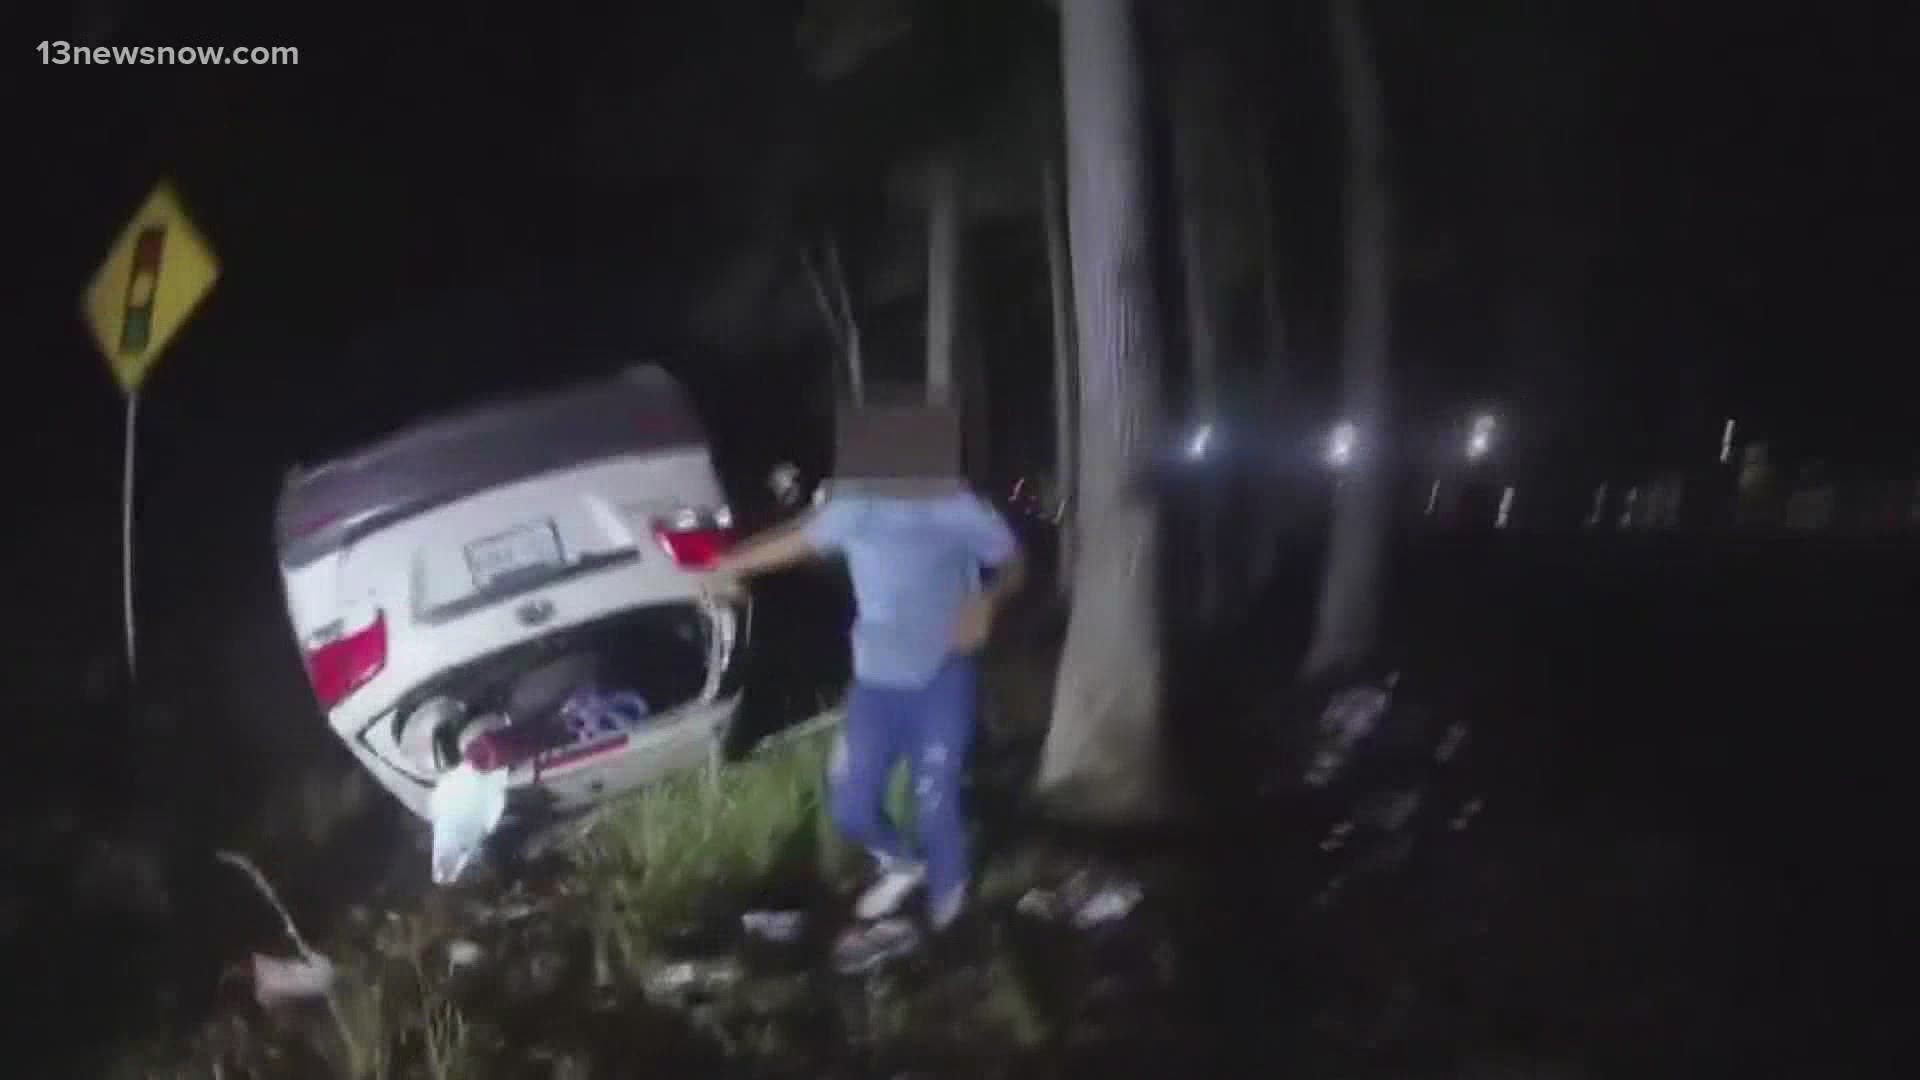 A Gloucester county sheriff's deputy saved a mother pinned underneath her car after an accident. Body camera footage shows the deputy in action.